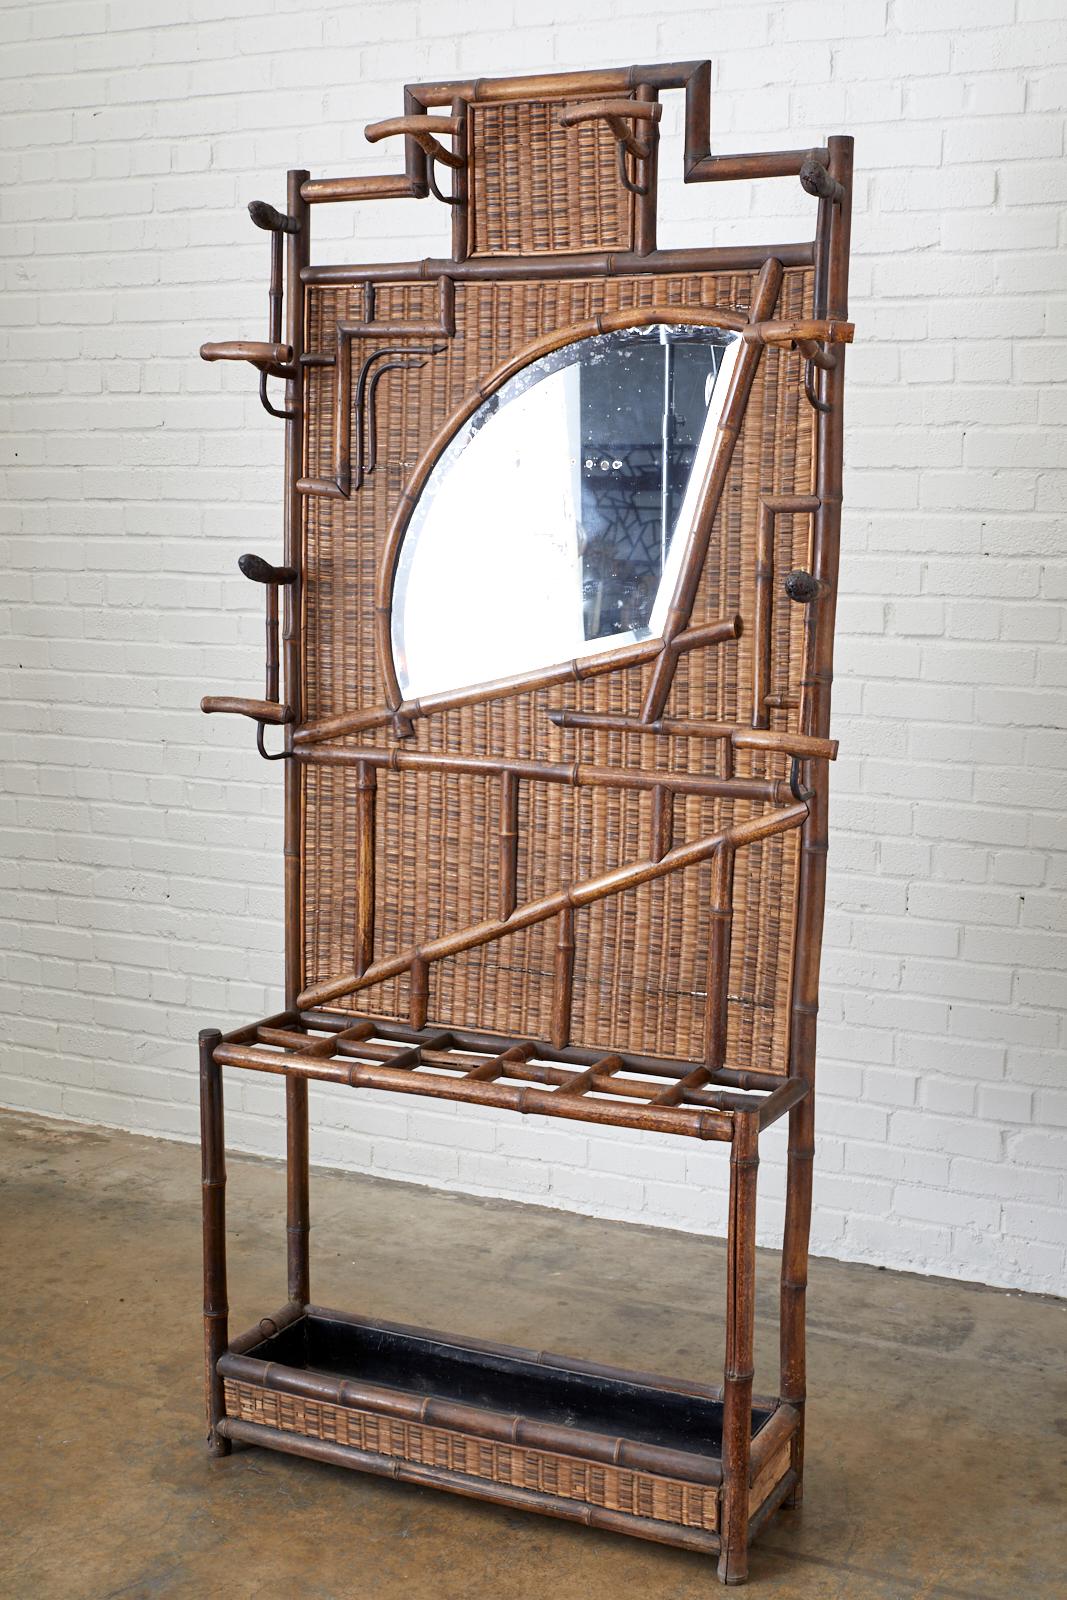 19th century bamboo hall tree and coat rack with umbrella stand made in the English aesthetic movement period. Features a stylized Asian fan motif beveled mirror surrounded by hat and coat hooks. The decorative frame is covered with a wicker